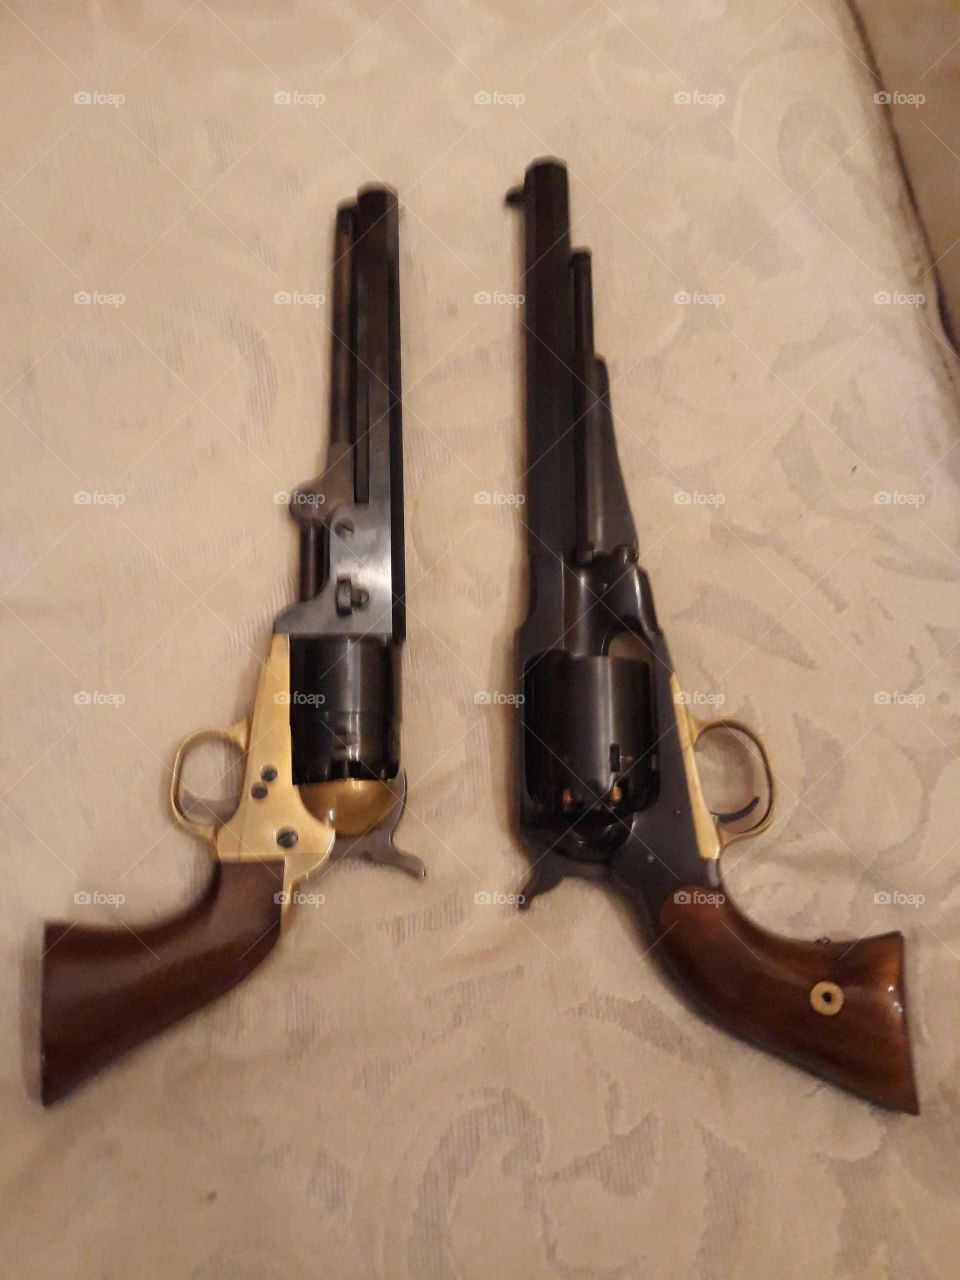 1851 Colt Navy (left) with 1858 Remington new model army (right)